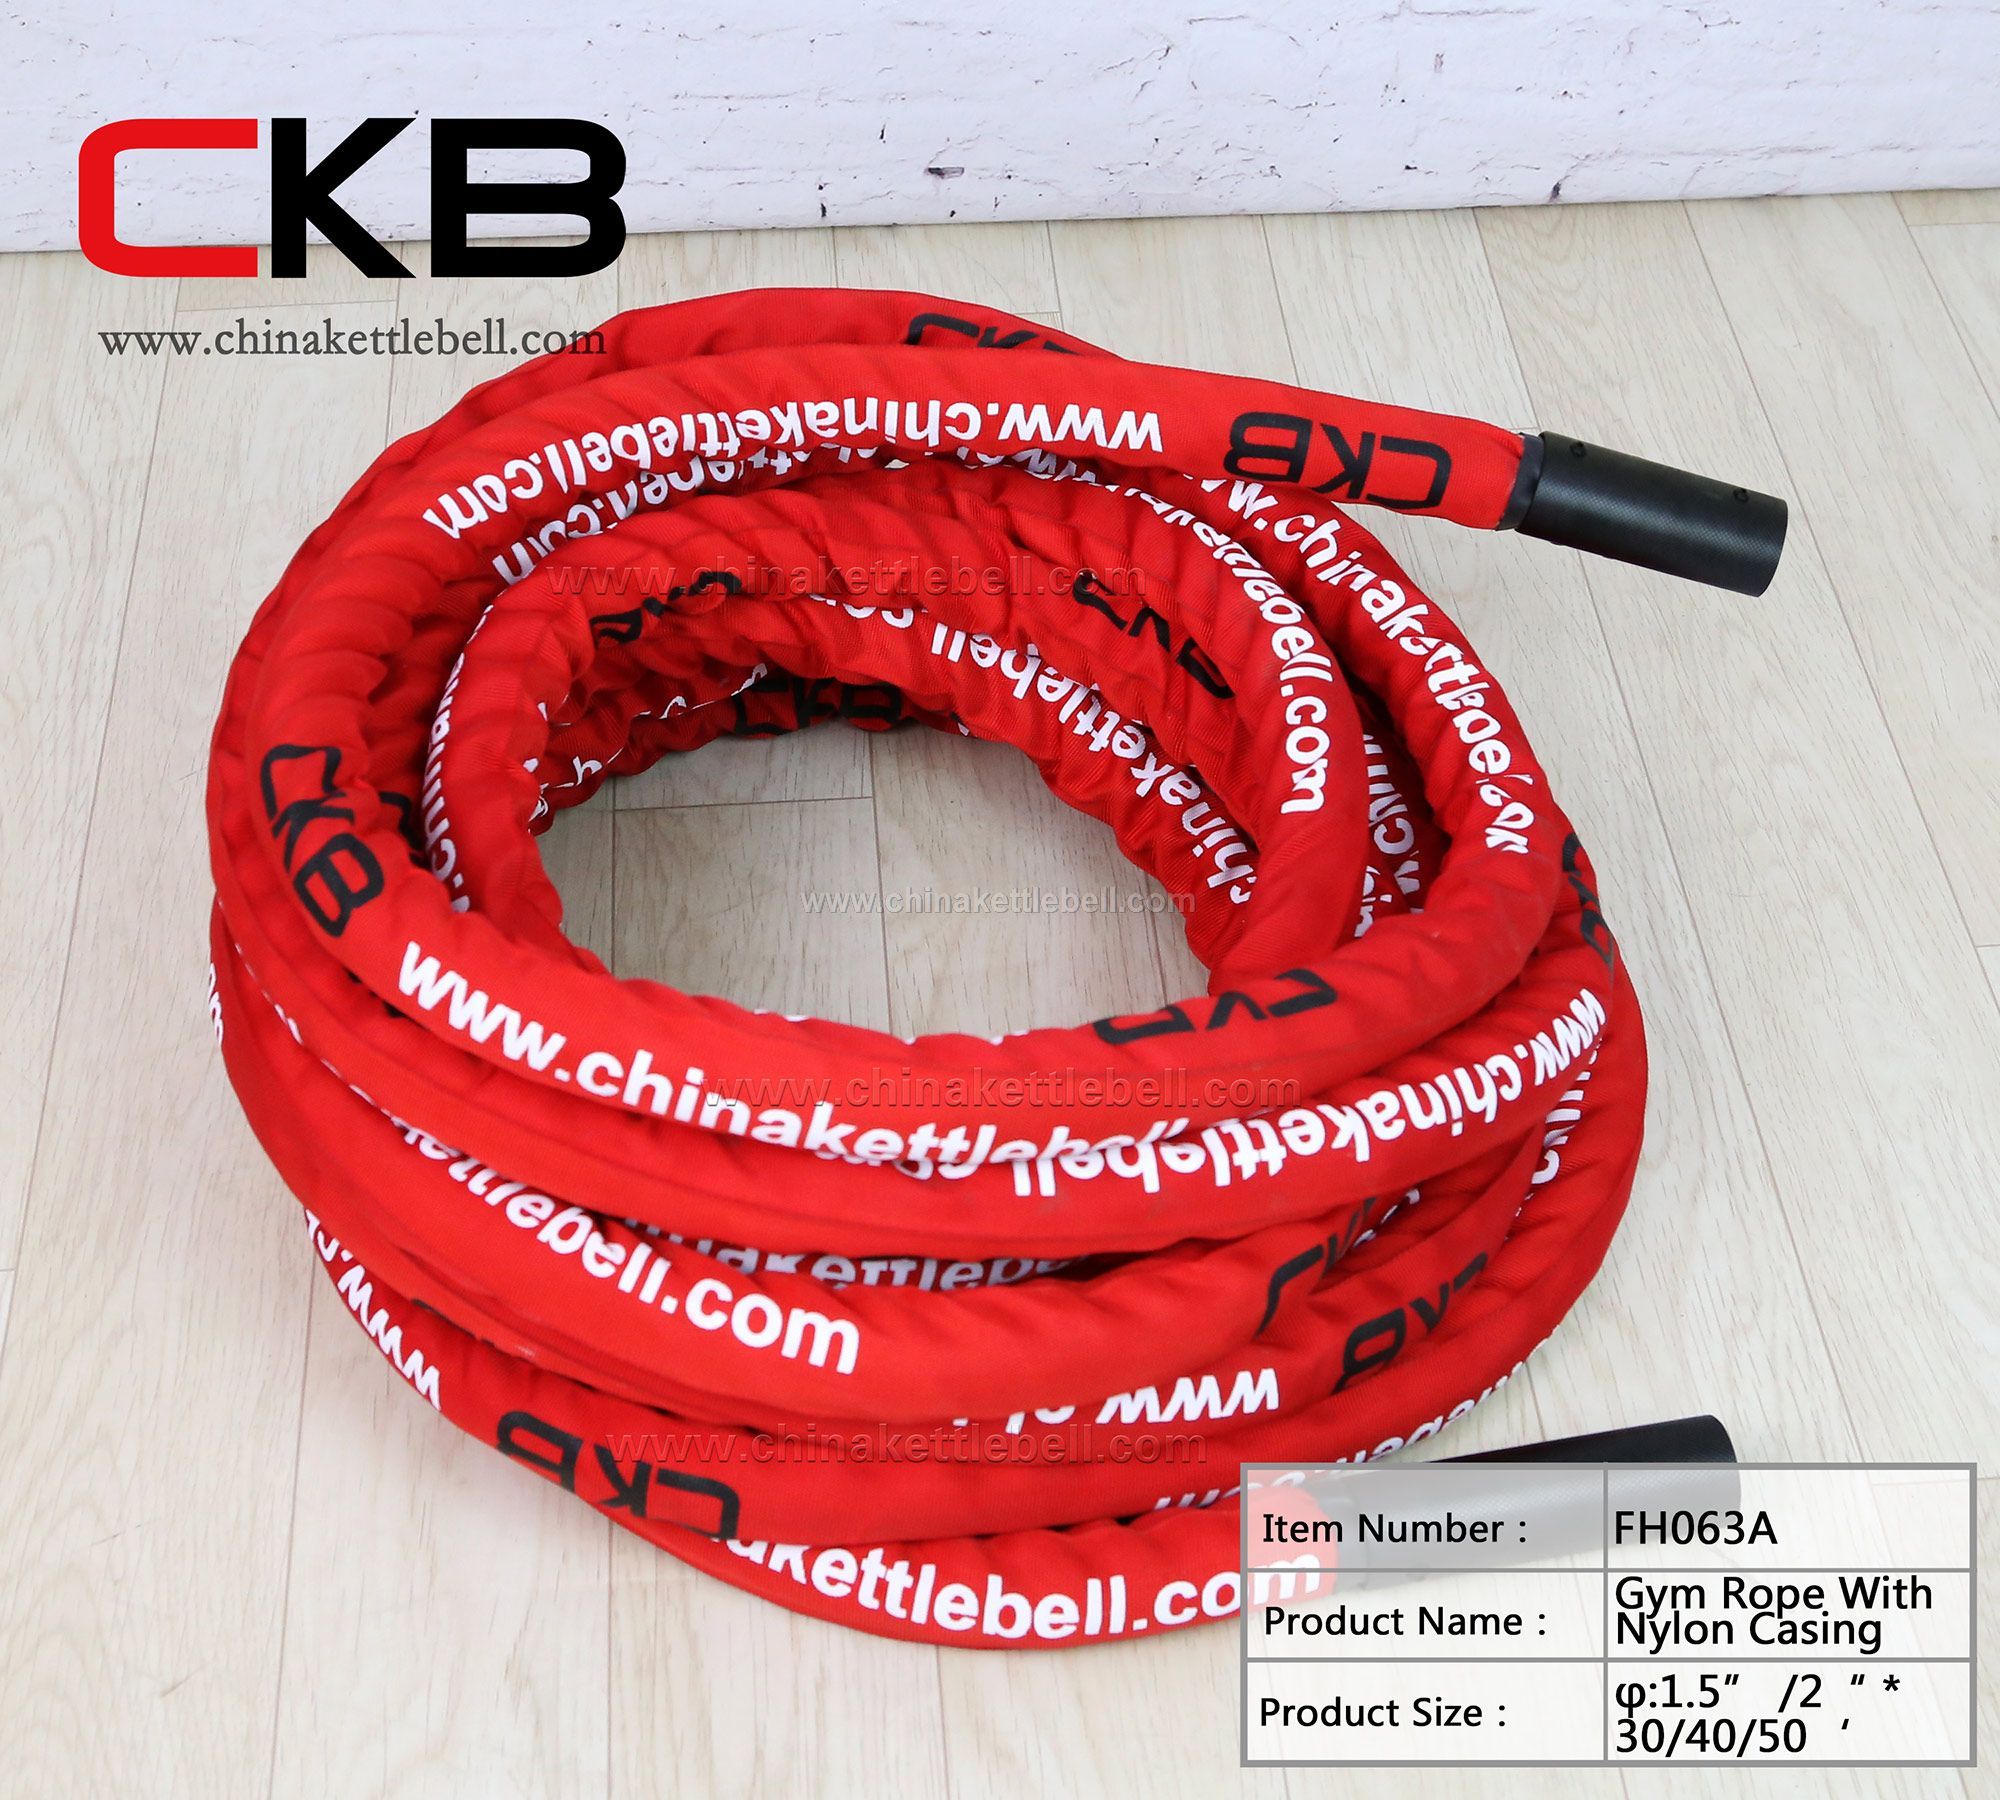 Gym rope with Nylon casing